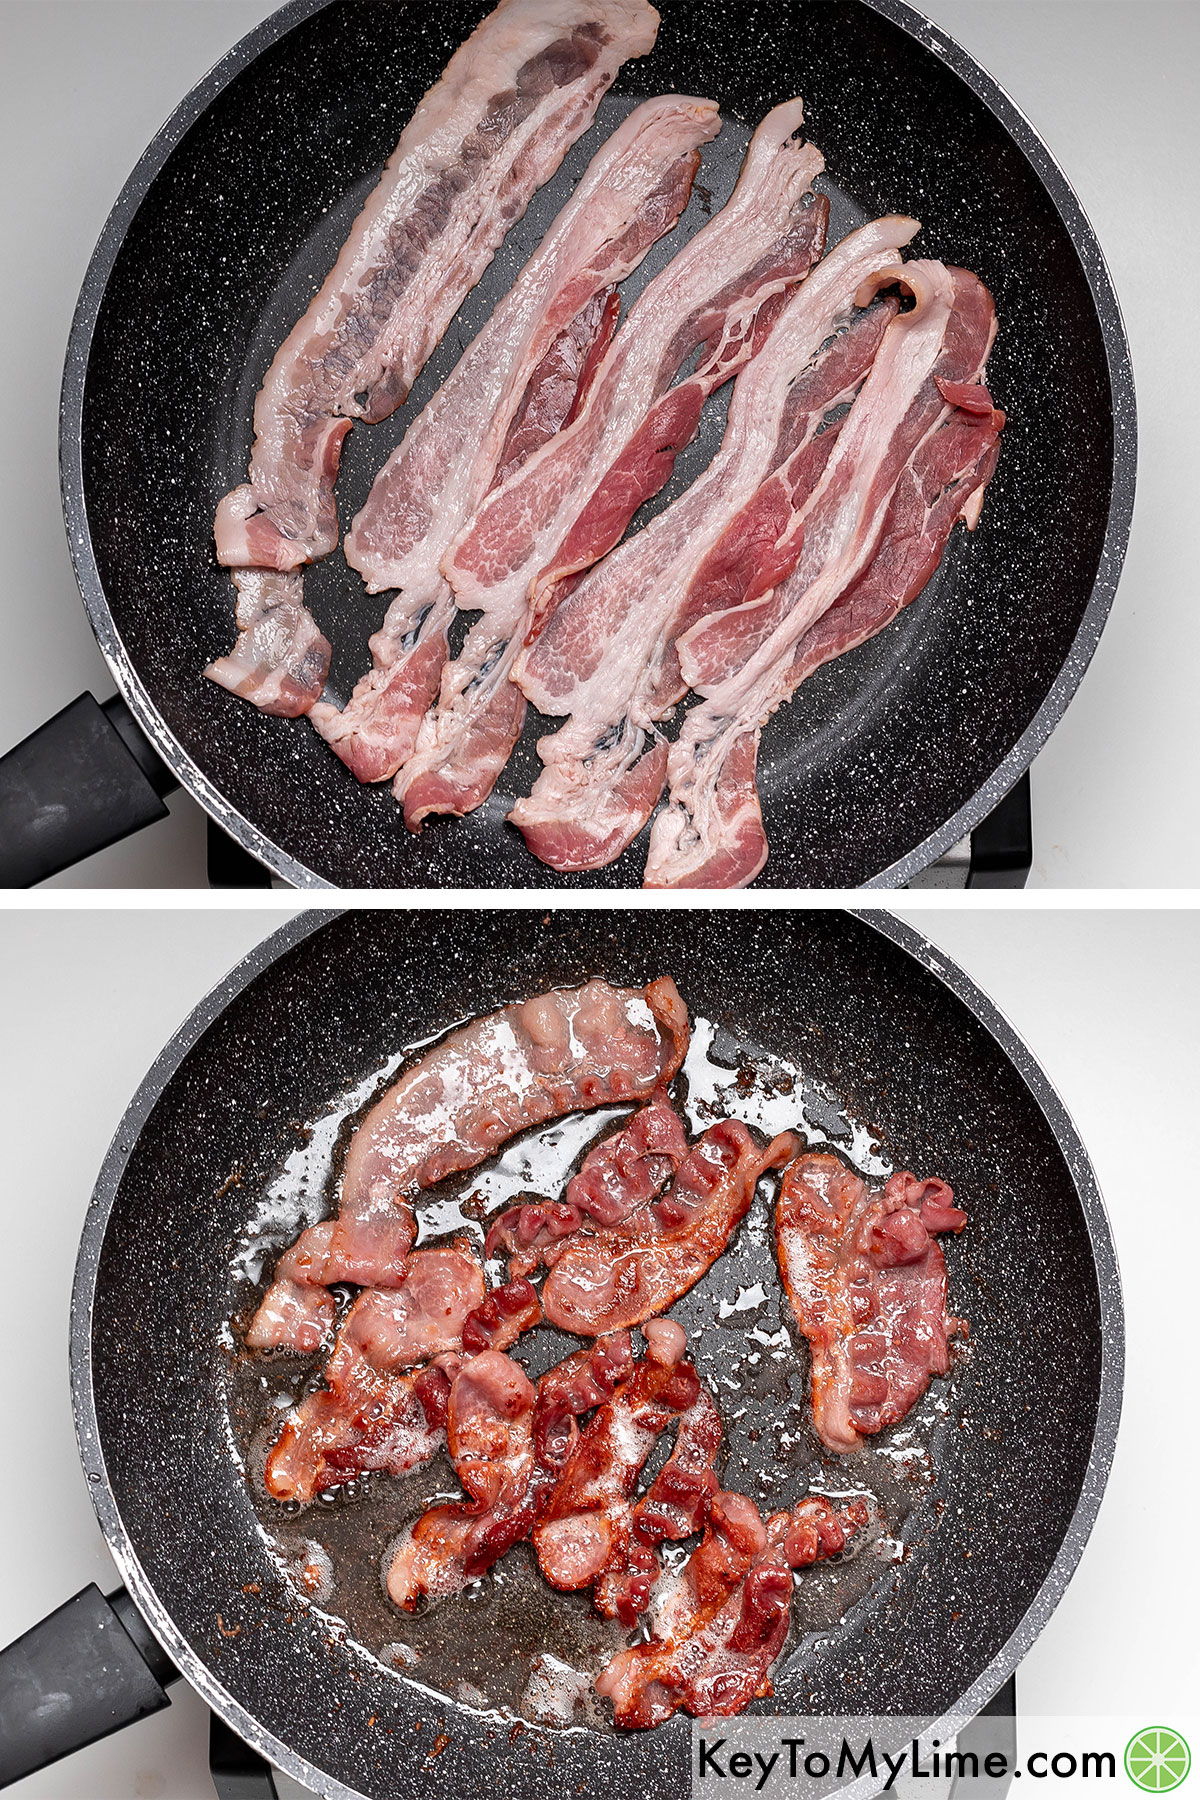 Cooking the bacon strips in a hot skillet until crispy then removing to cool.